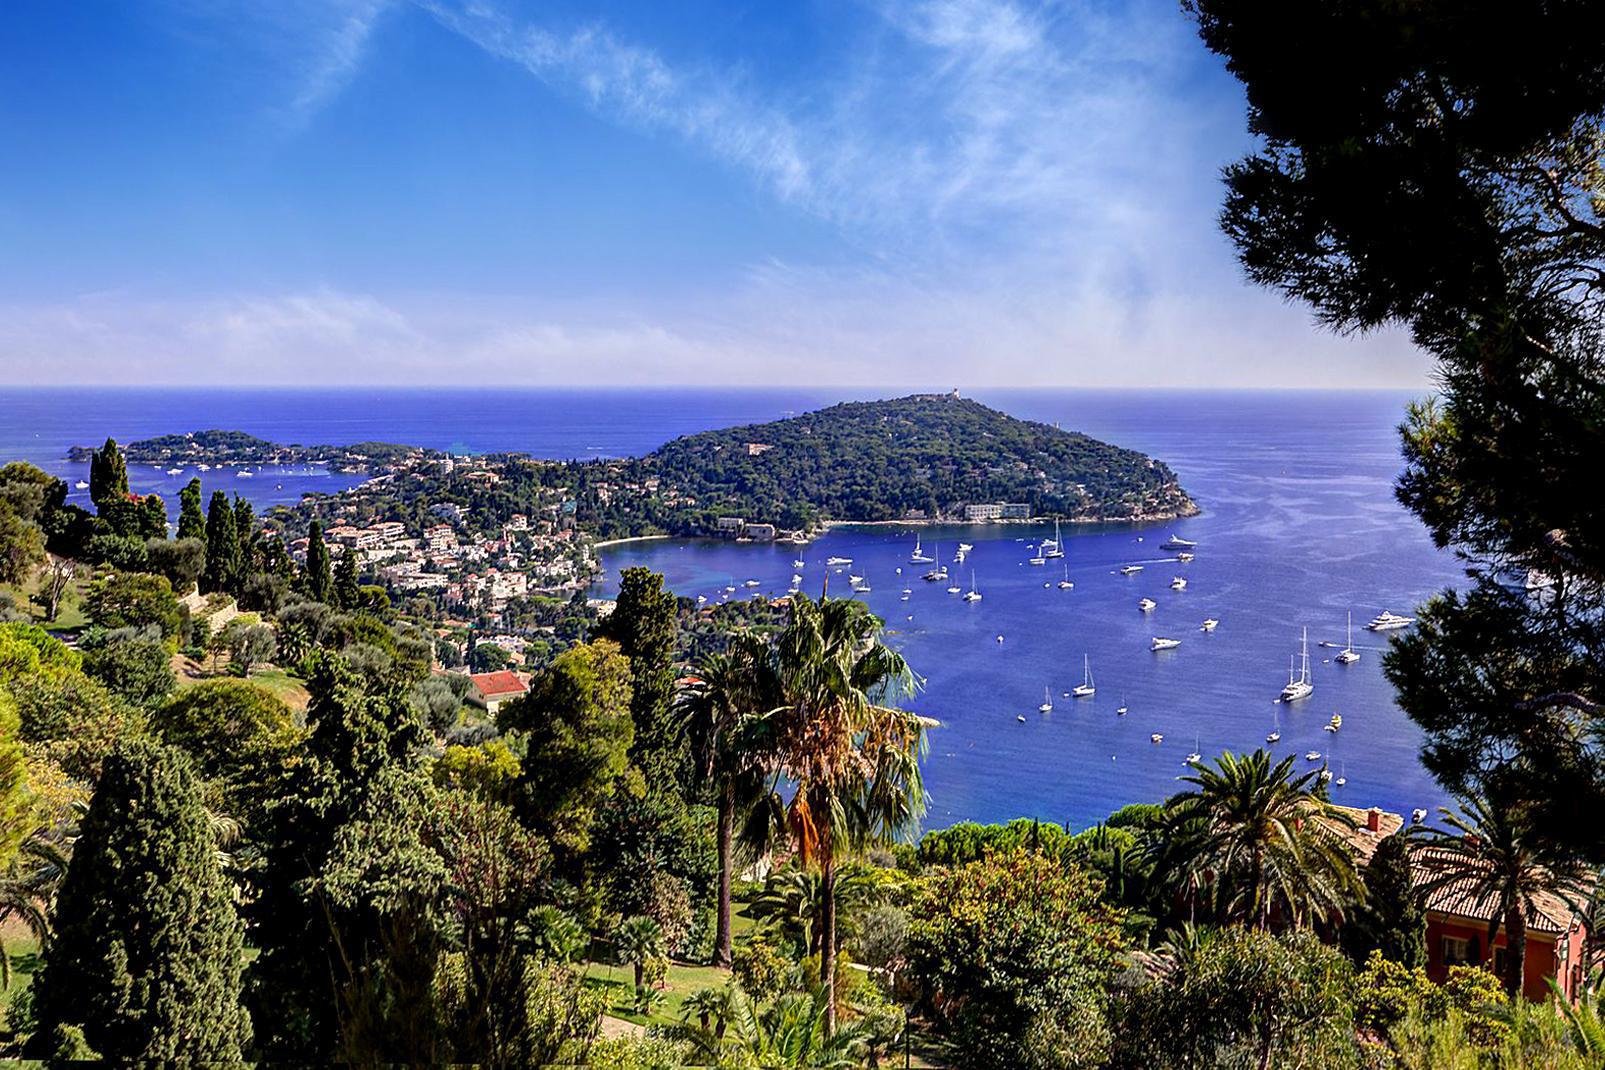 Celebrities, royalty, artists, politicians and wealthy industrialists are among those who have found themselves seduced by the charms of Saint-Jean-Cap-Ferrat. The town is located in Southeast France, about 6 miles out of Nice and is often seen as the apex of the French Riviera's 